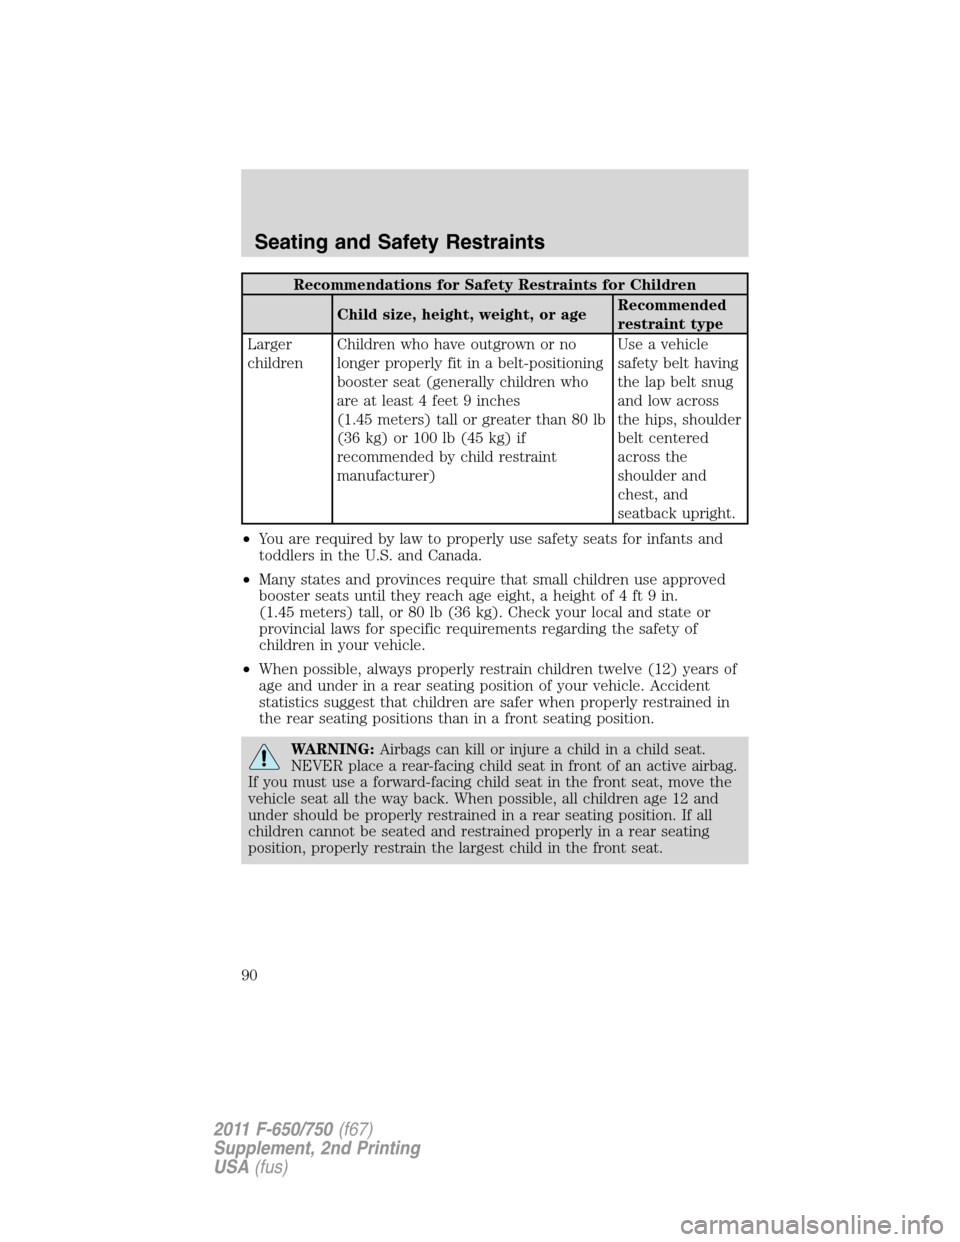 FORD F650 2011 12.G Owners Manual Recommendations for Safety Restraints for Children
Child size, height, weight, or ageRecommended
restraint type
Larger
childrenChildren who have outgrown or no
longer properly fit in a belt-positionin